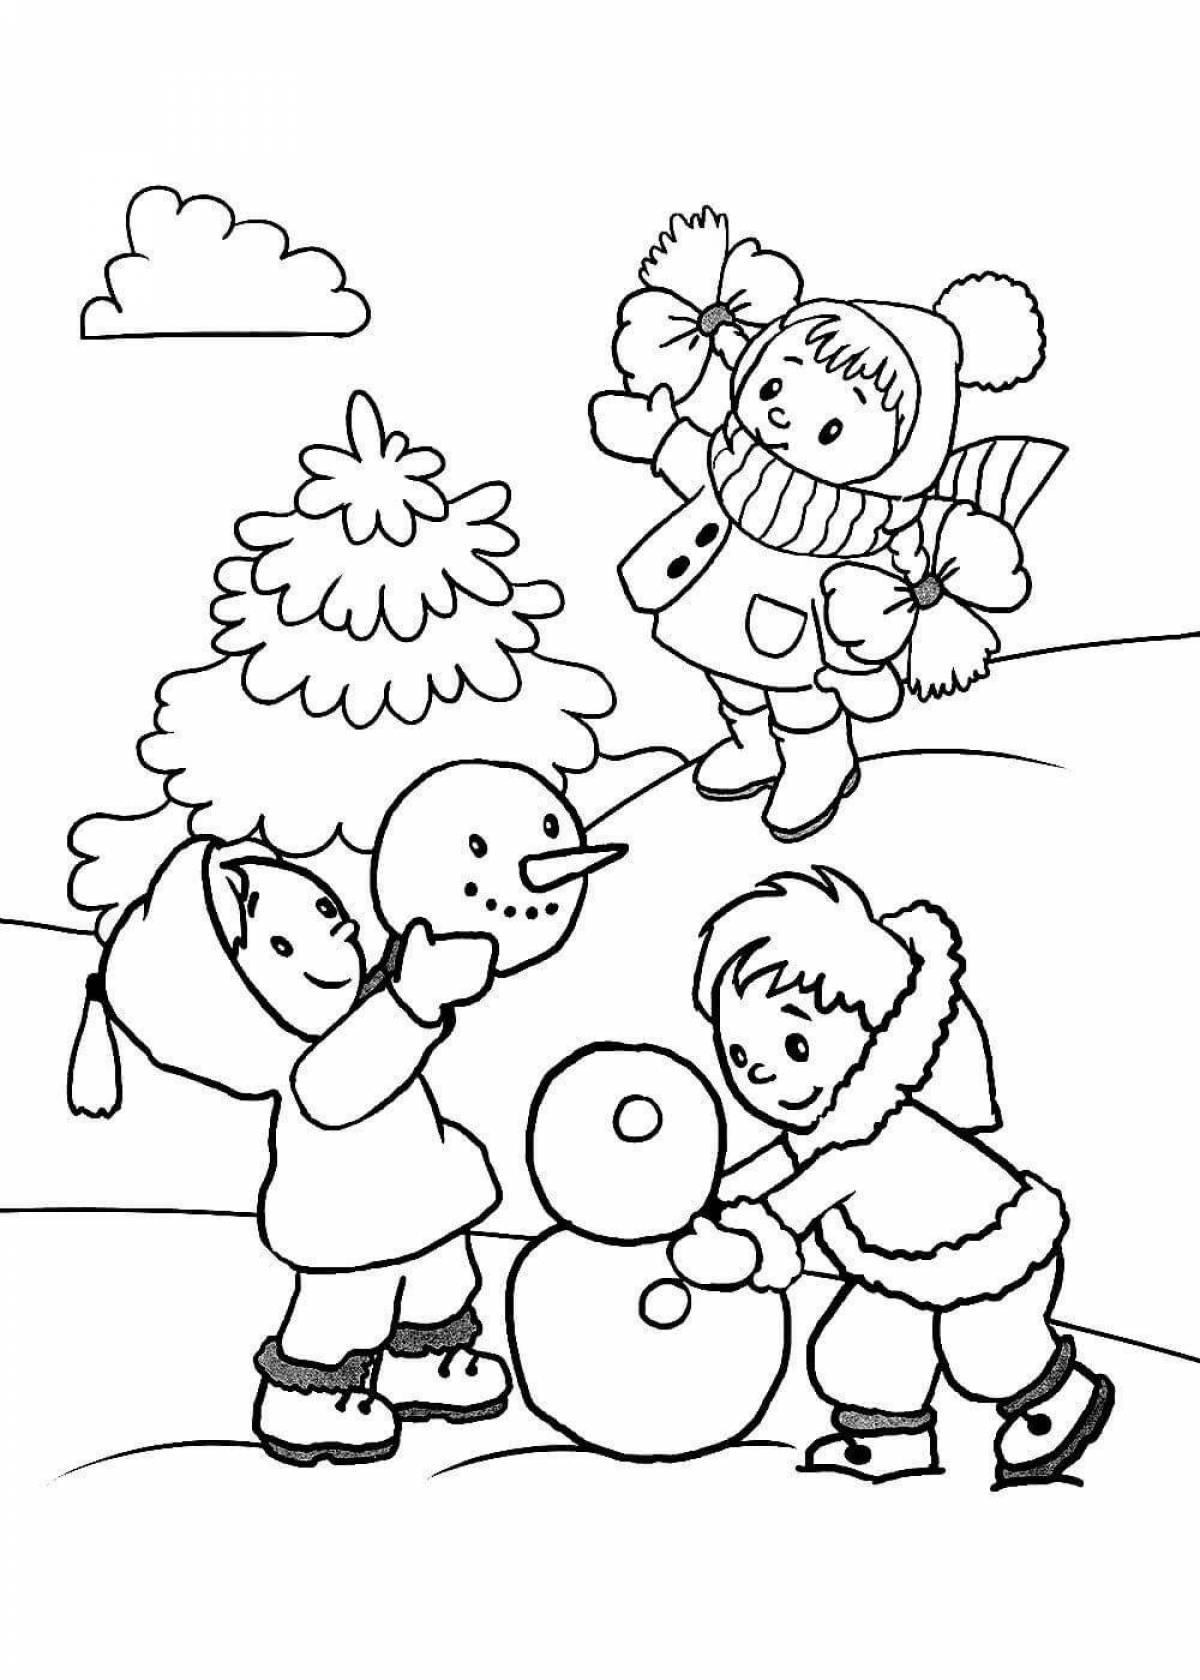 Major winter coloring book for kids 4 5